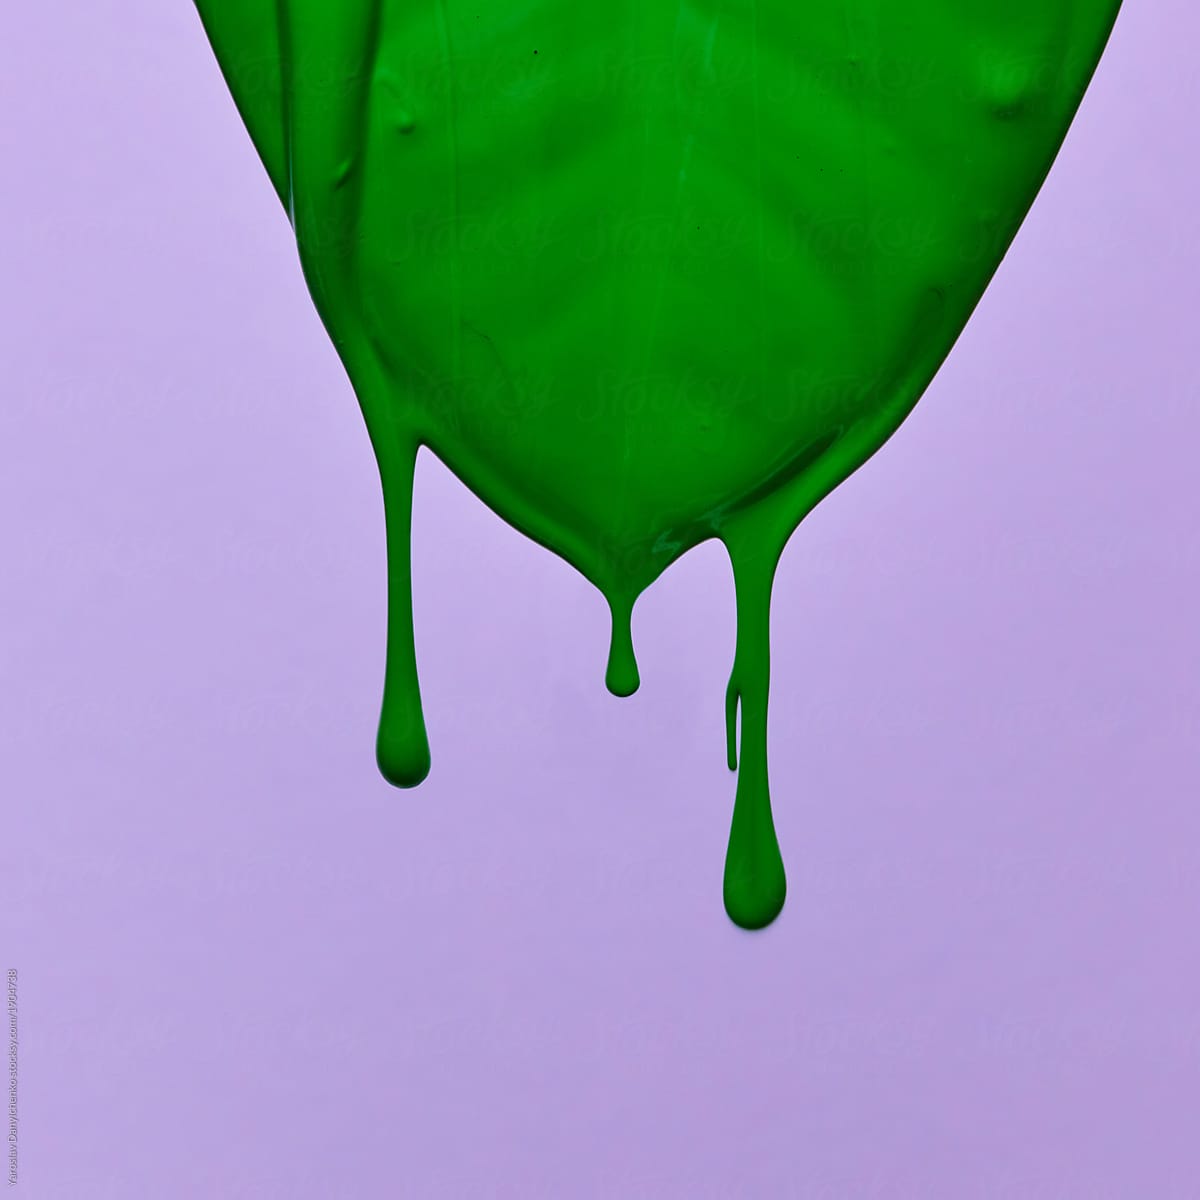 Petal of ficus painted with green paint on a purple background